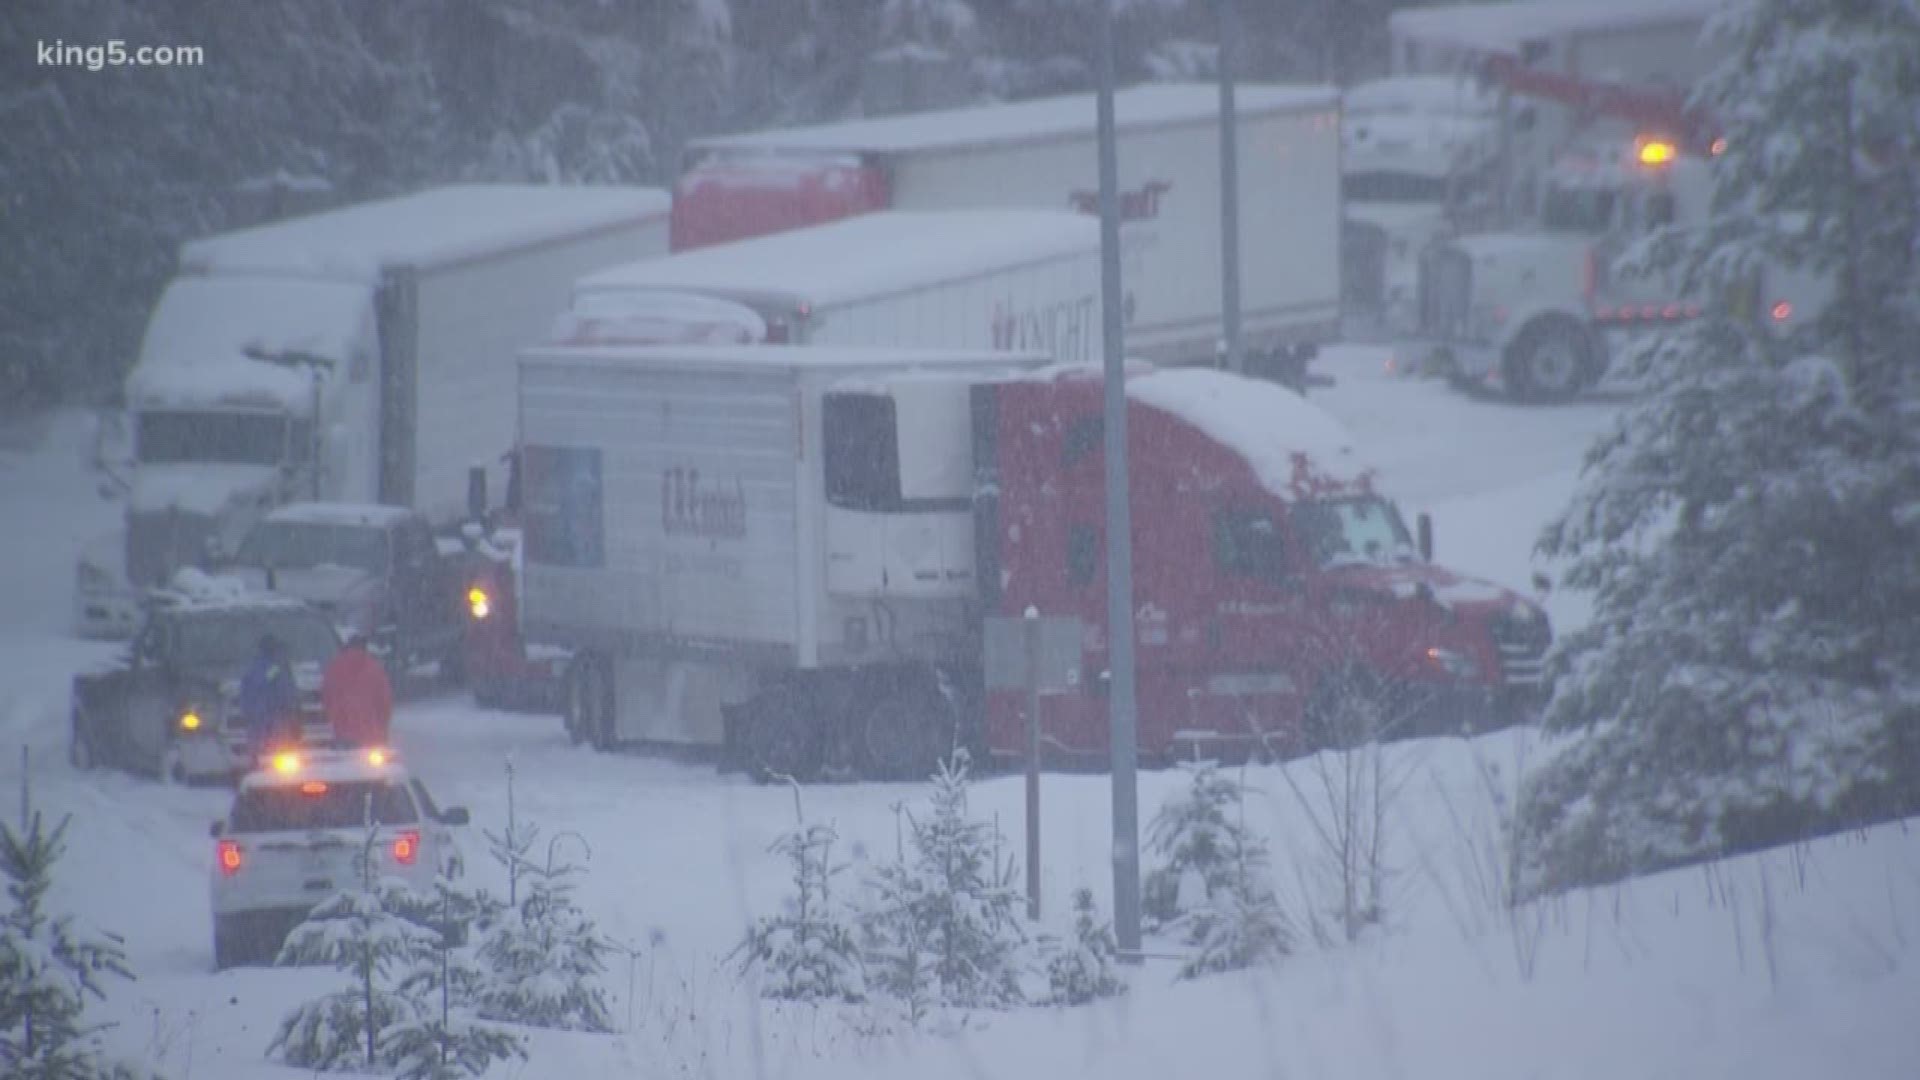 It's no secret the winter weather has created dangerous conditions on roads across Western Washington. That's especially true in the higher elevations, including on I-90. KING 5’s Michael Crowe caught up with truckers who found themselves stranded for hours.